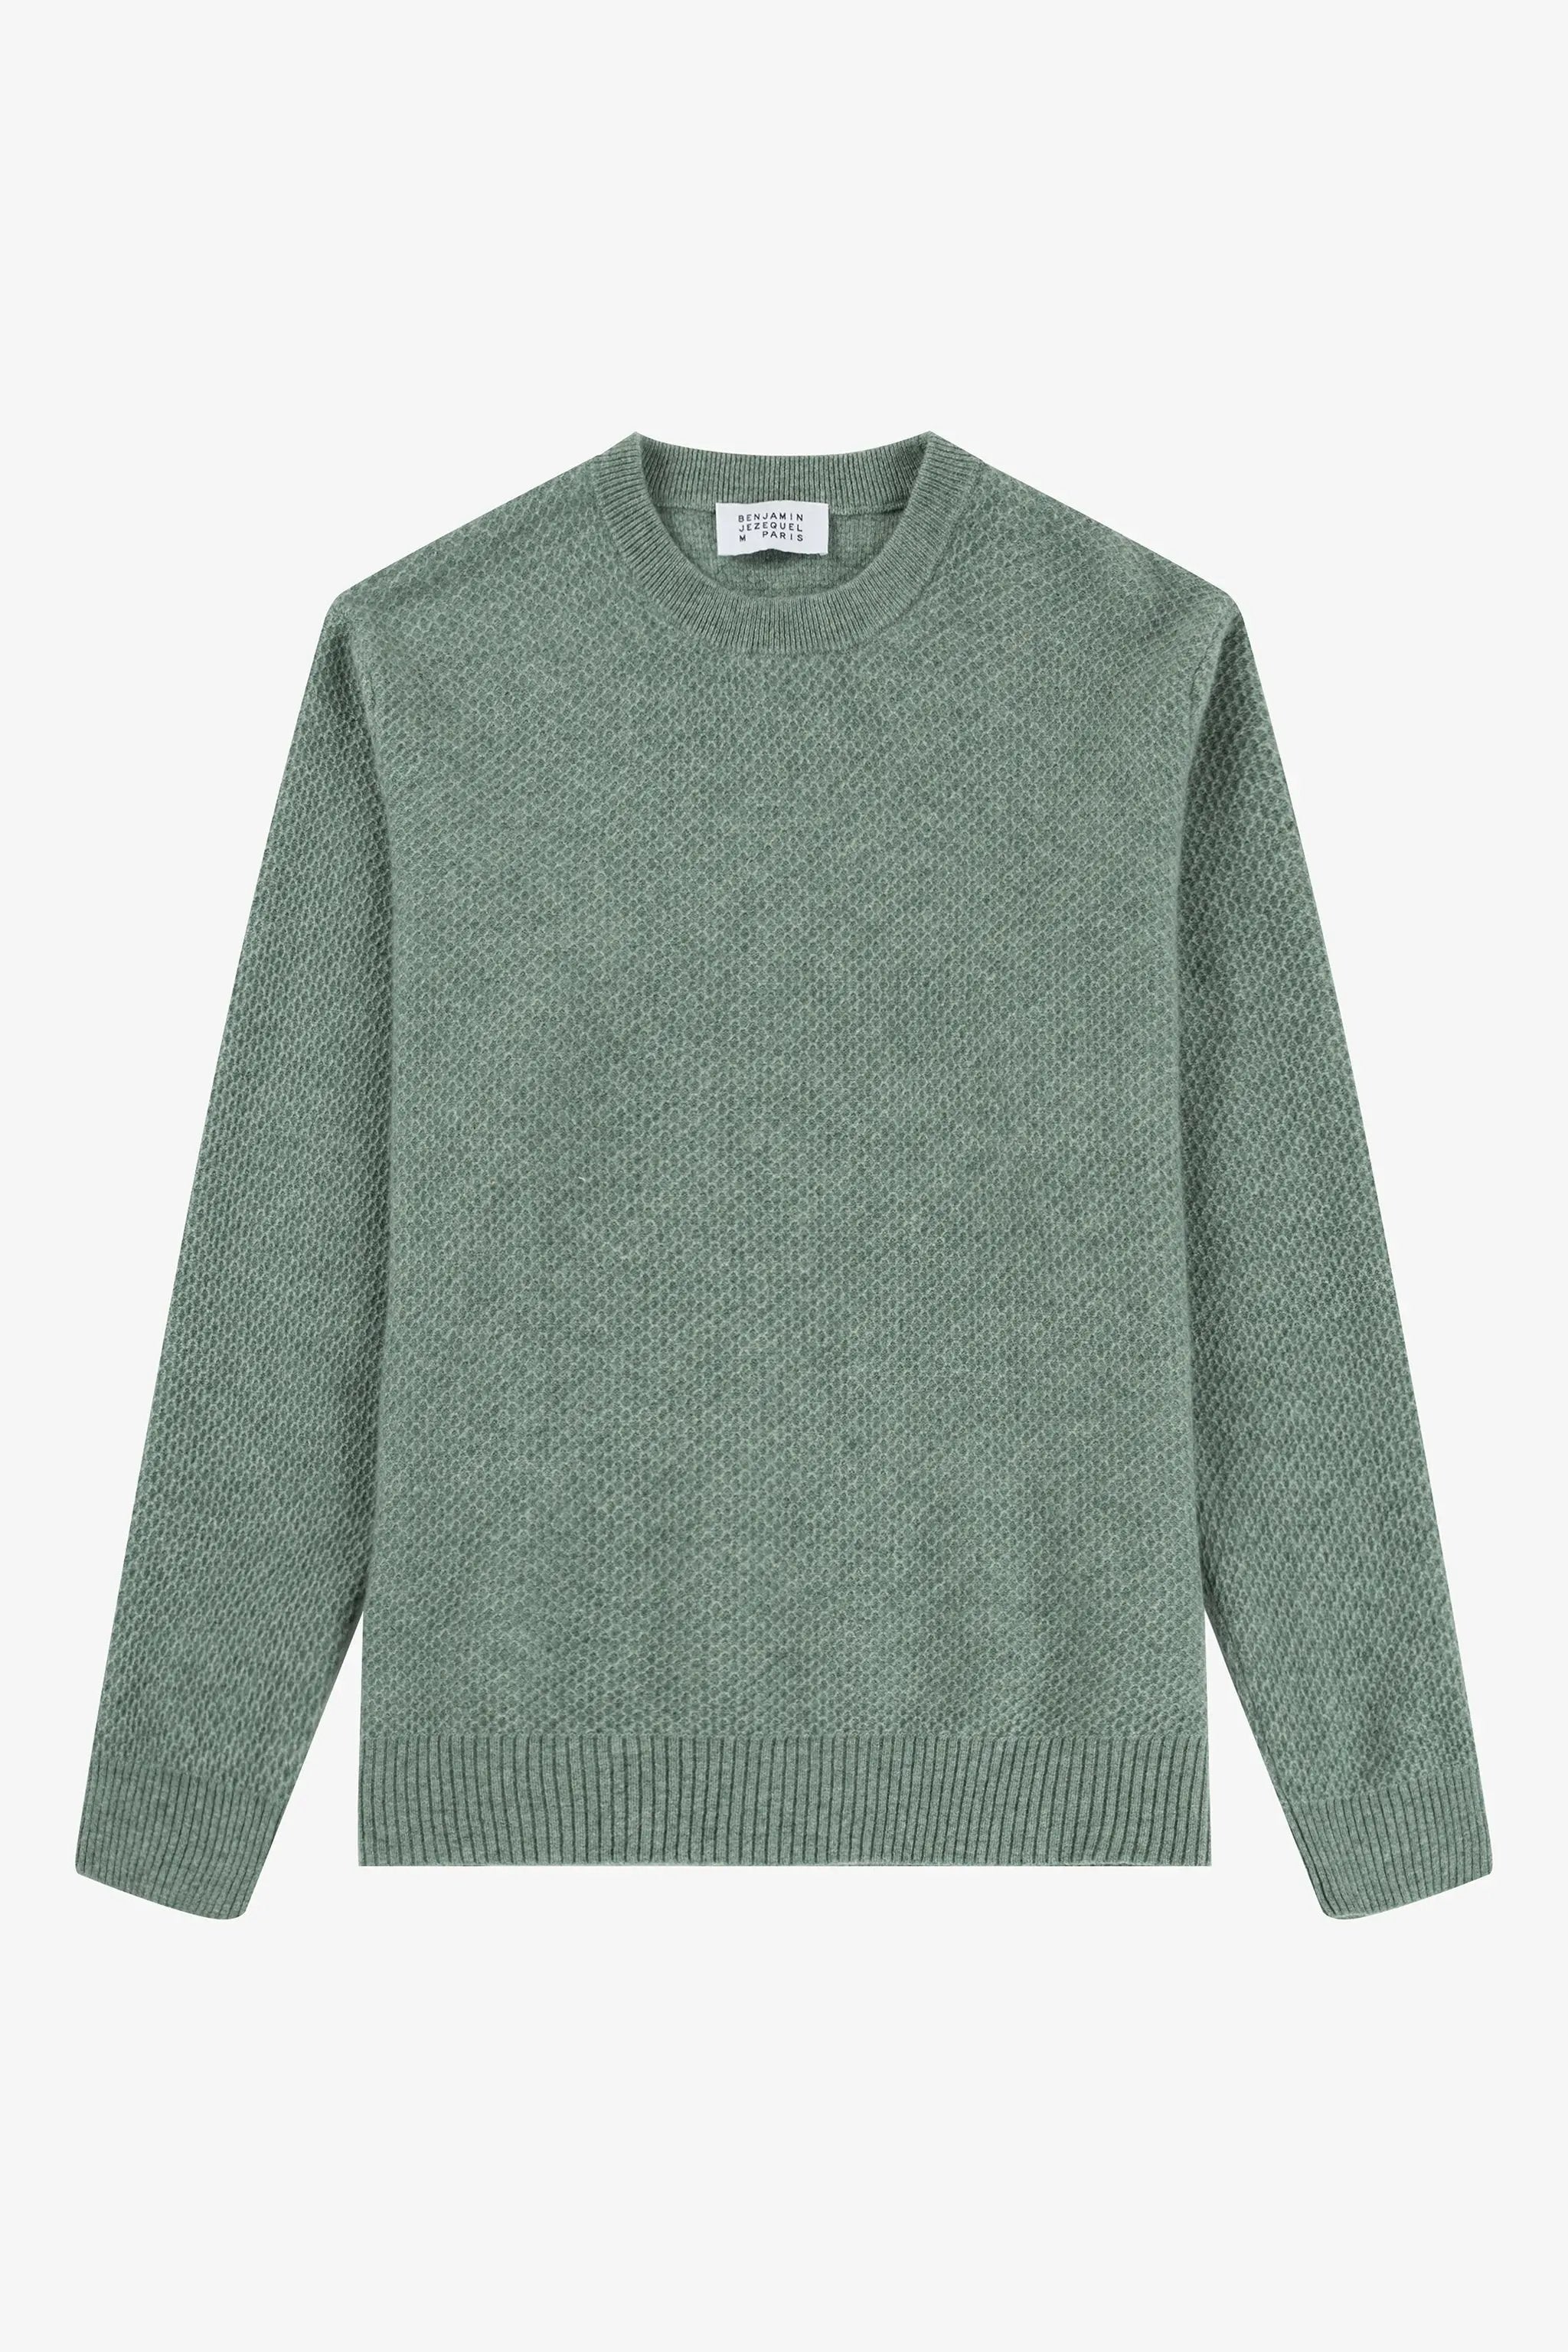 a green sweater with a round neck and long sleeves